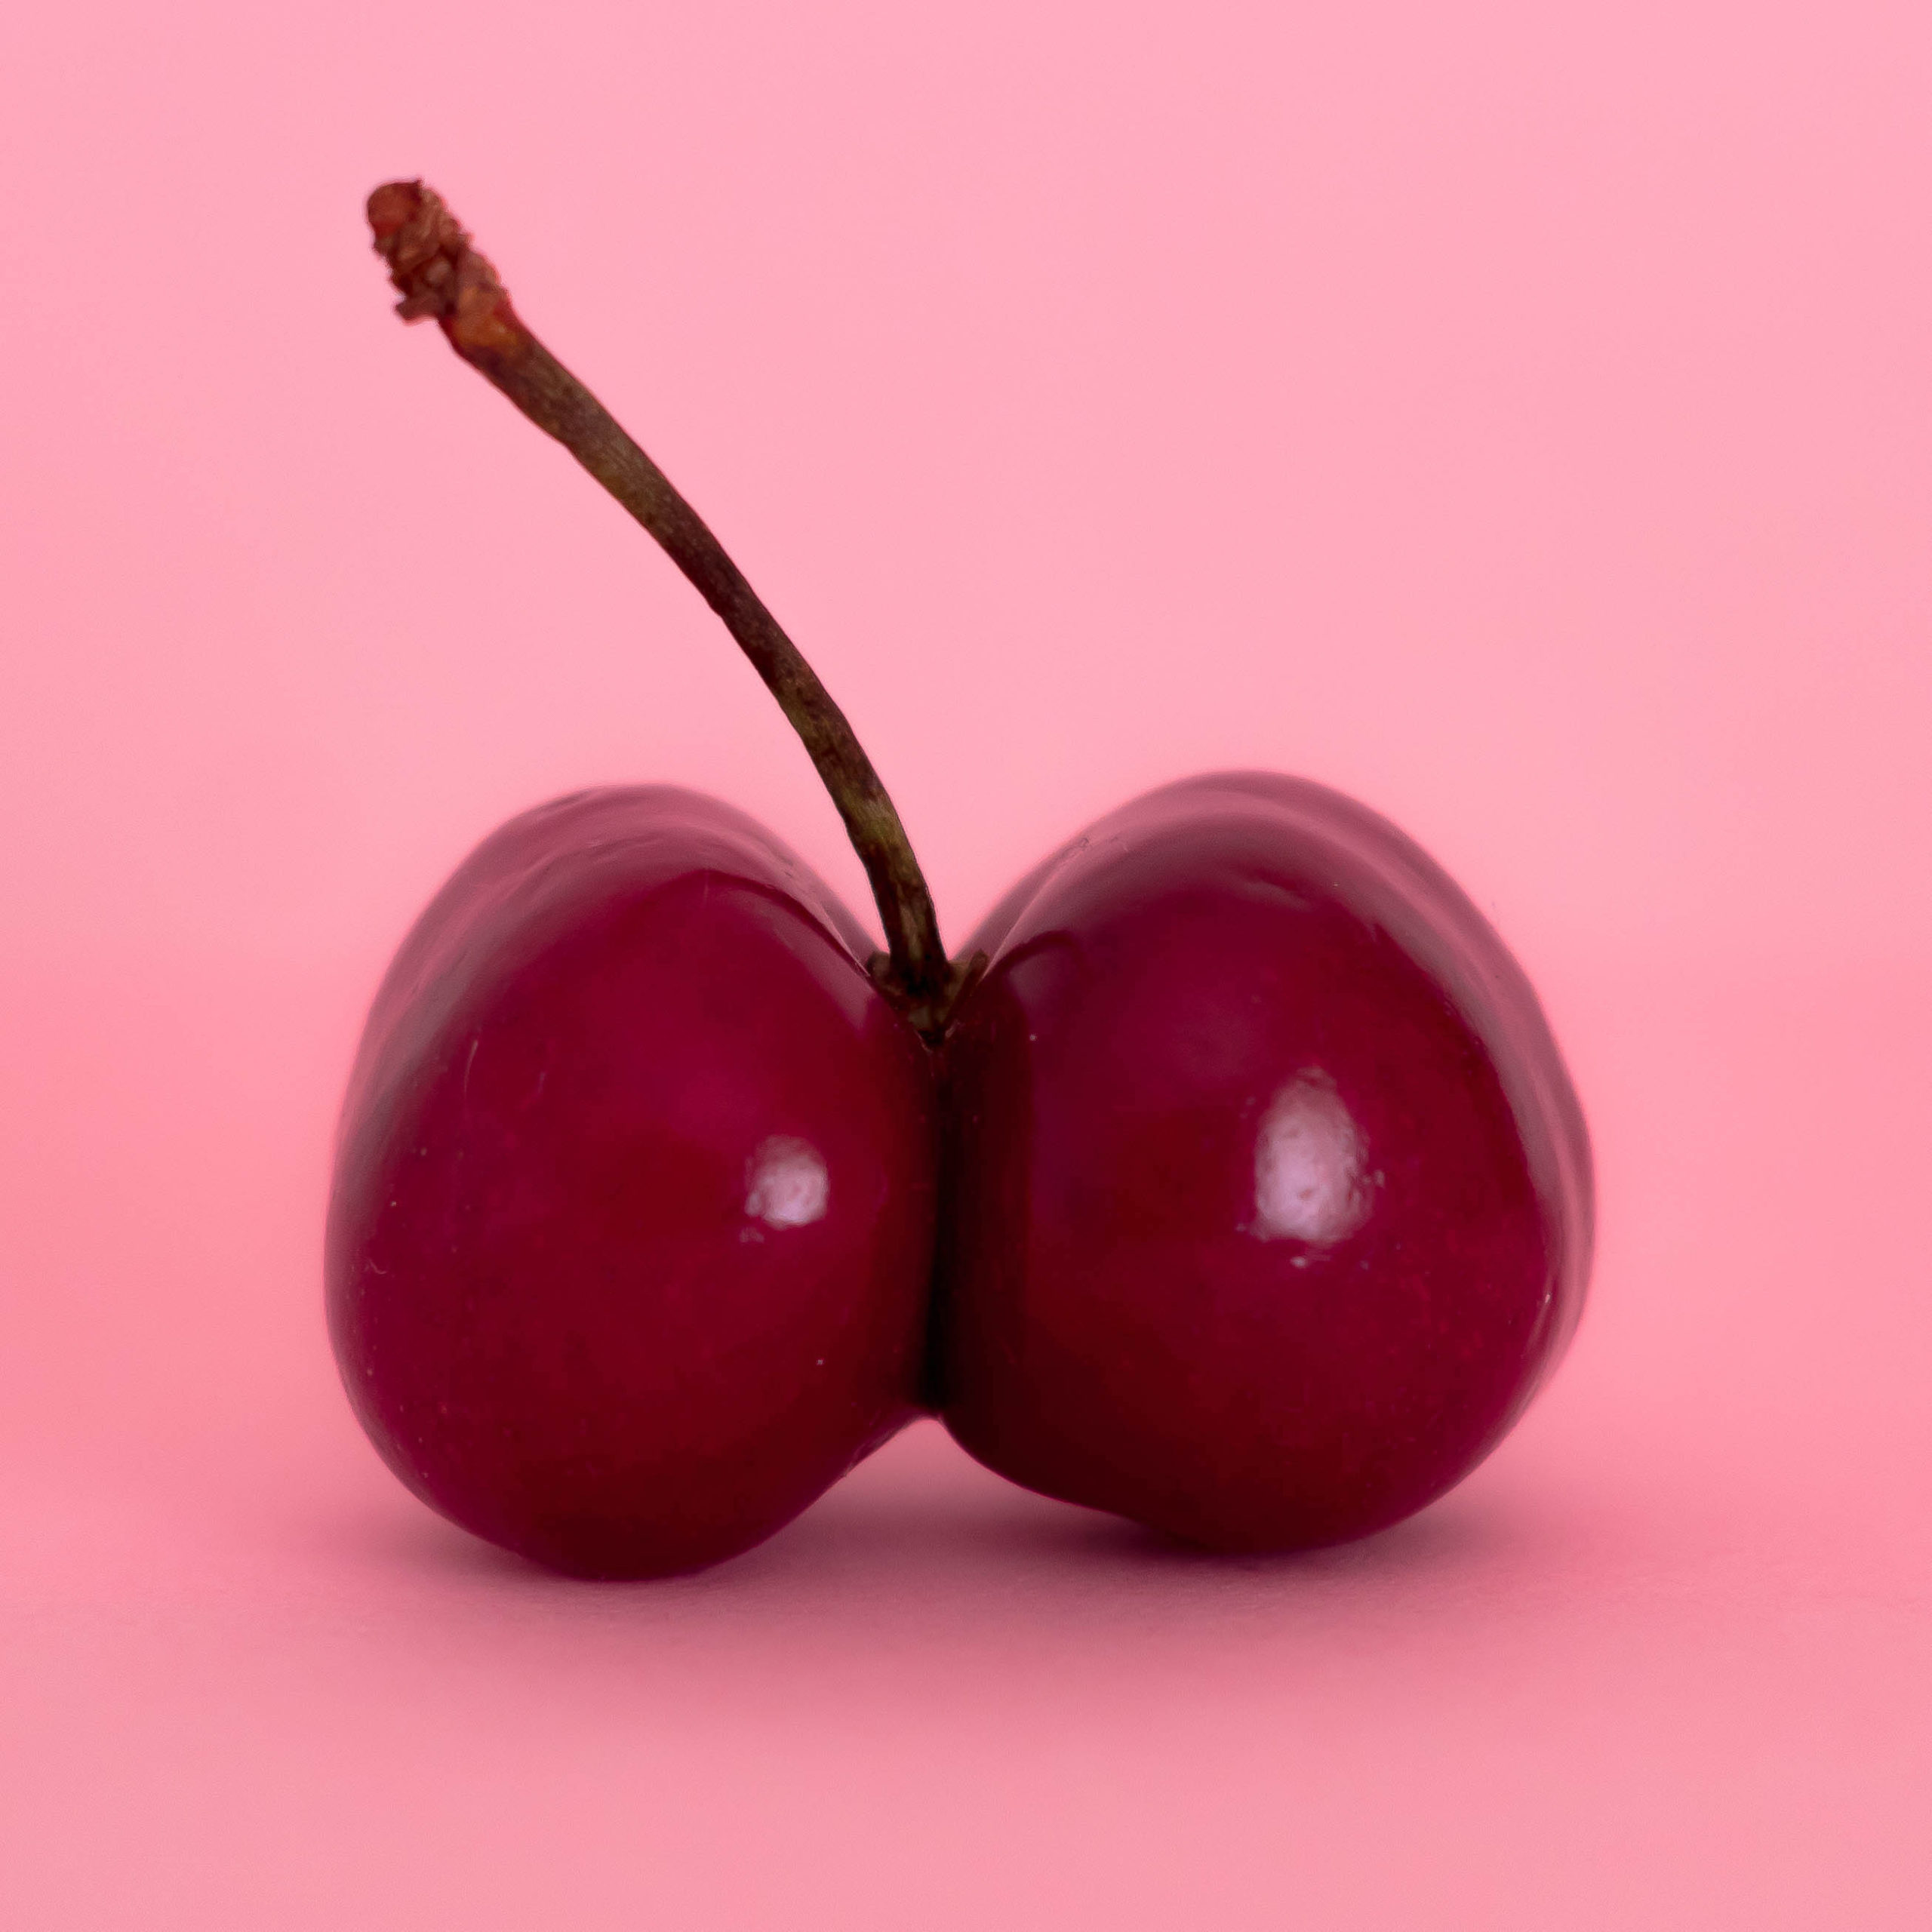 a cherry with two sections